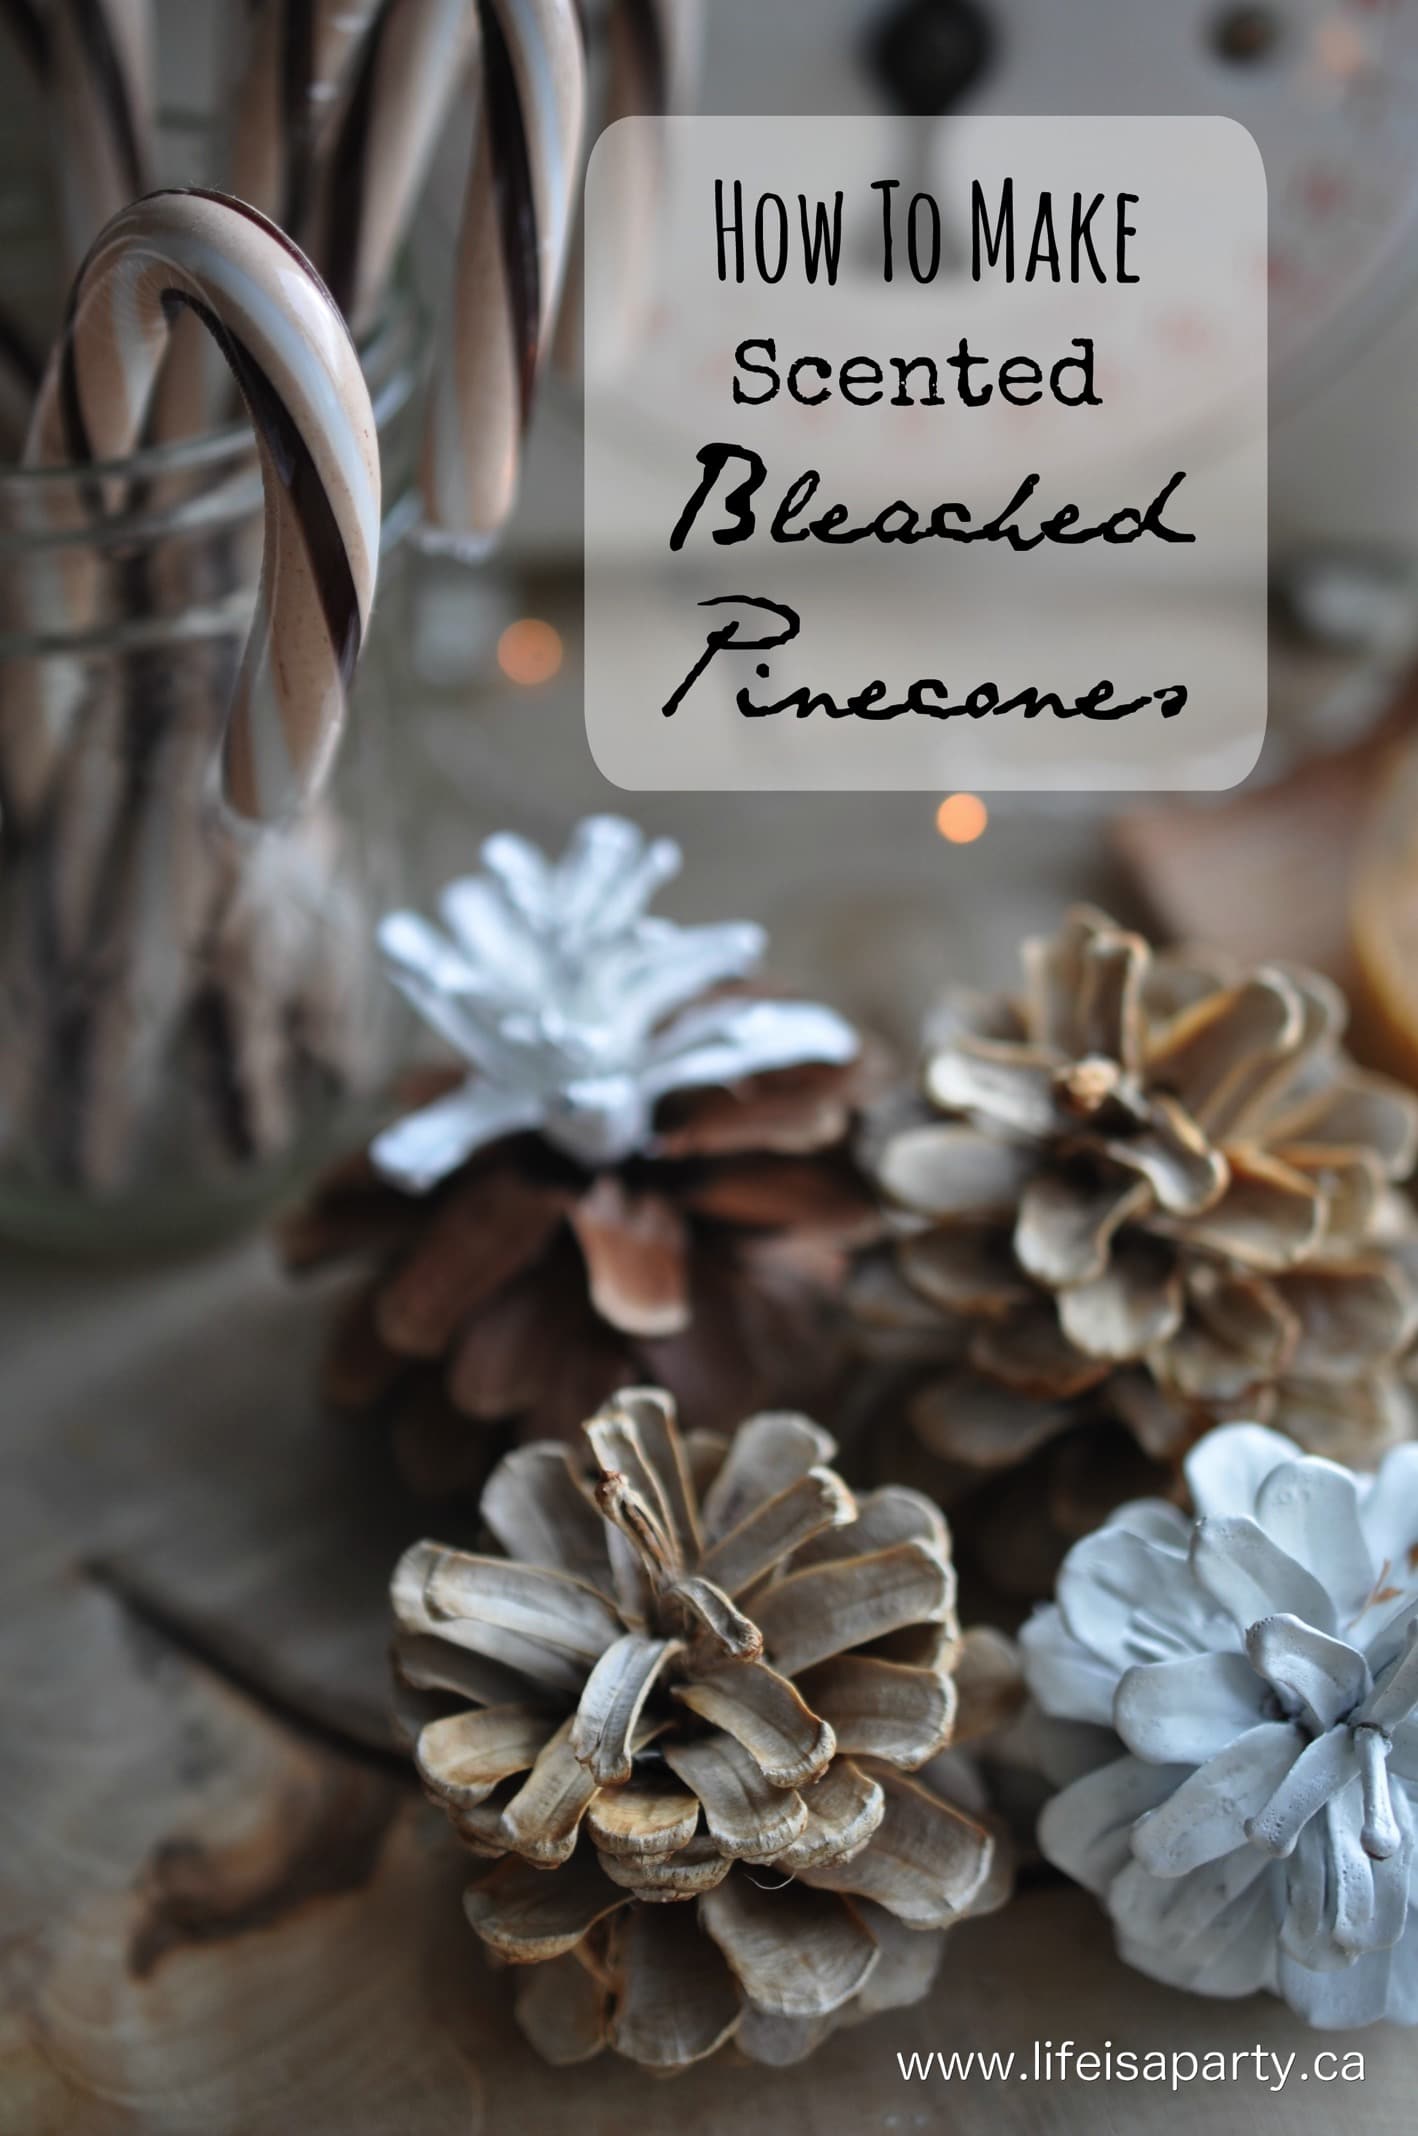 DIY Scented Bleached Pinecones: How to make your own scented bleached pinecones.